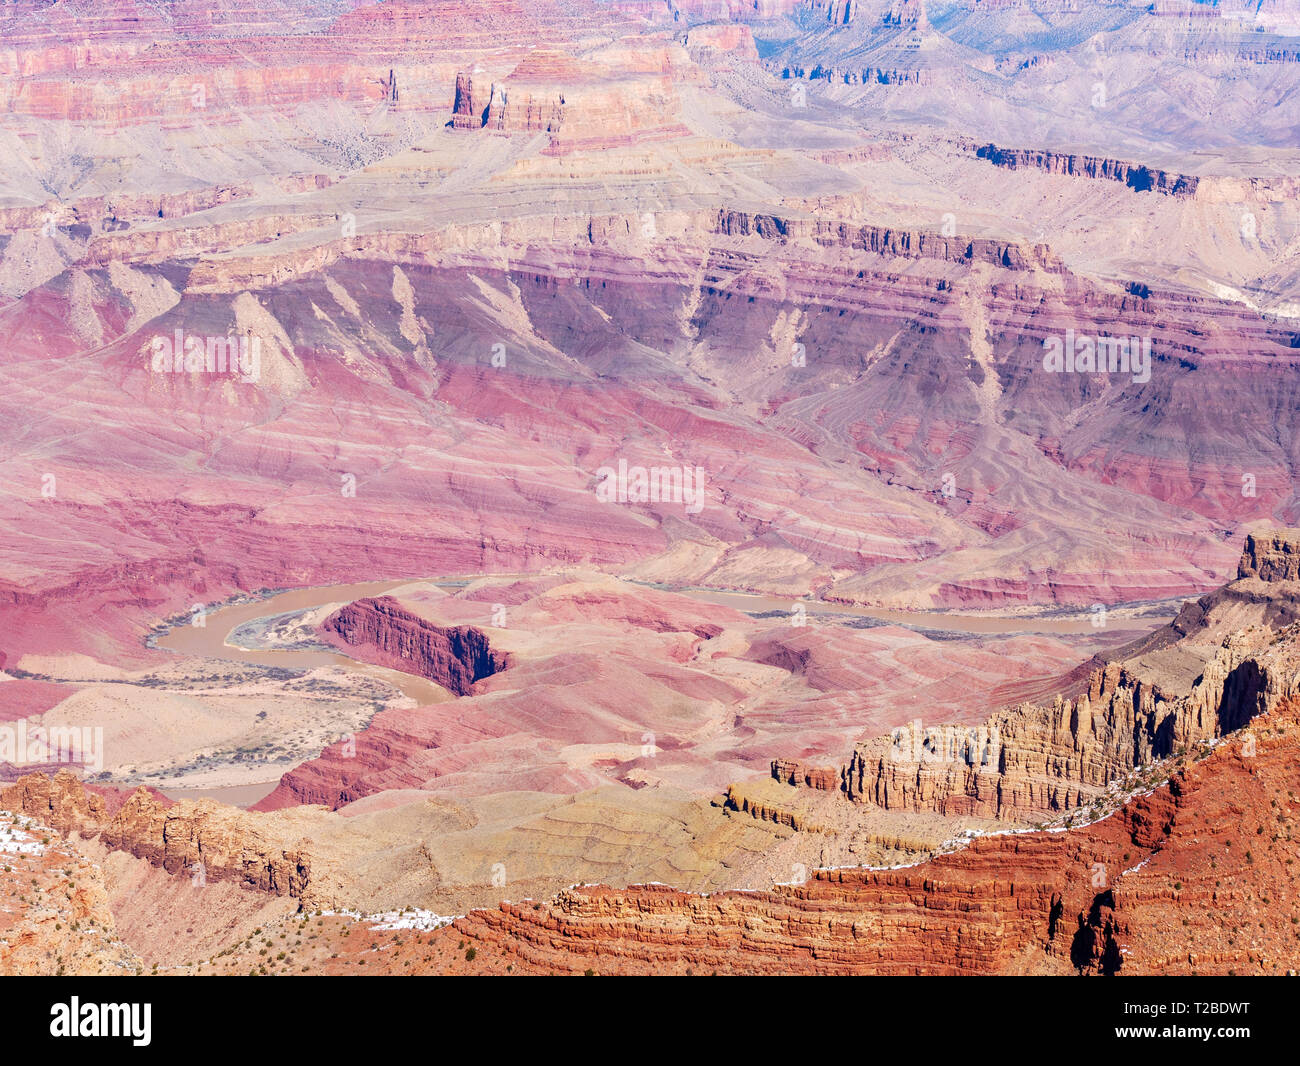 The Great Unconformity (top left) between the tilted Grand Canyon Supergroup and overlying Tonto Group at Apollo Temple, viewed from Lipan Point. Stock Photo